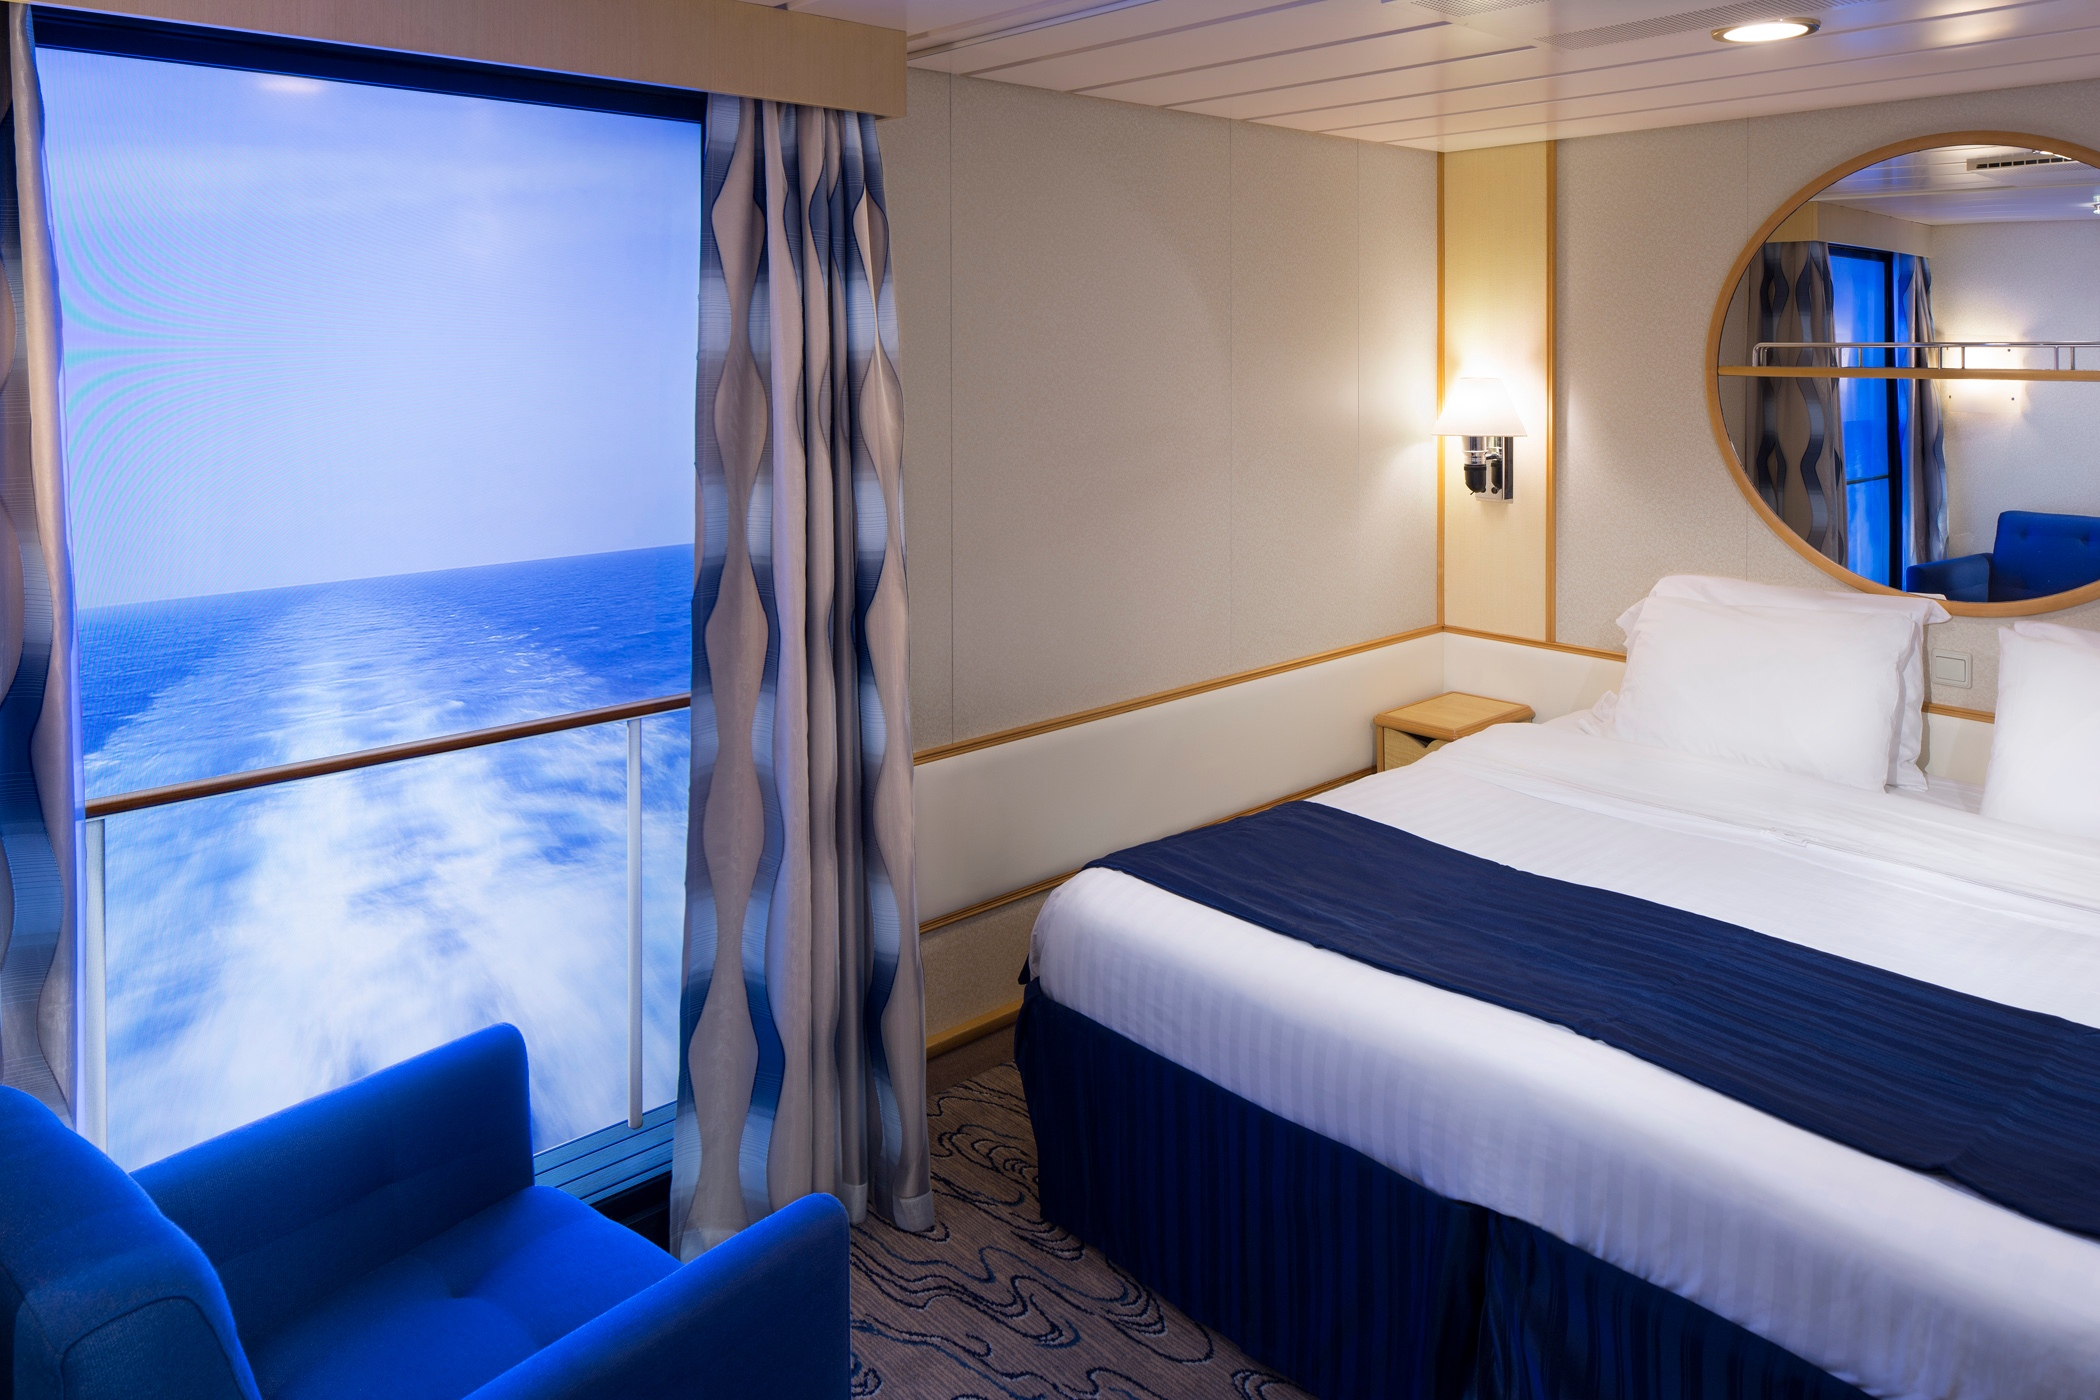 Image sourced from the Royal Caribbean website at: https://www.google.com/url?sa=i&url=https%3A%2F%2Fwww.royalcaribbean.com%2Fblog%2Fan-inside-room-with-a-view%2F&psig=AOvVaw1QCe6auDDZnxFDIV4nH4kK&ust=1669476917448000&source=images&cd=vfe&ved=0CBAQjRxqFwoTCNj5kqfUyfsCFQAAAAAdAAAAABAO